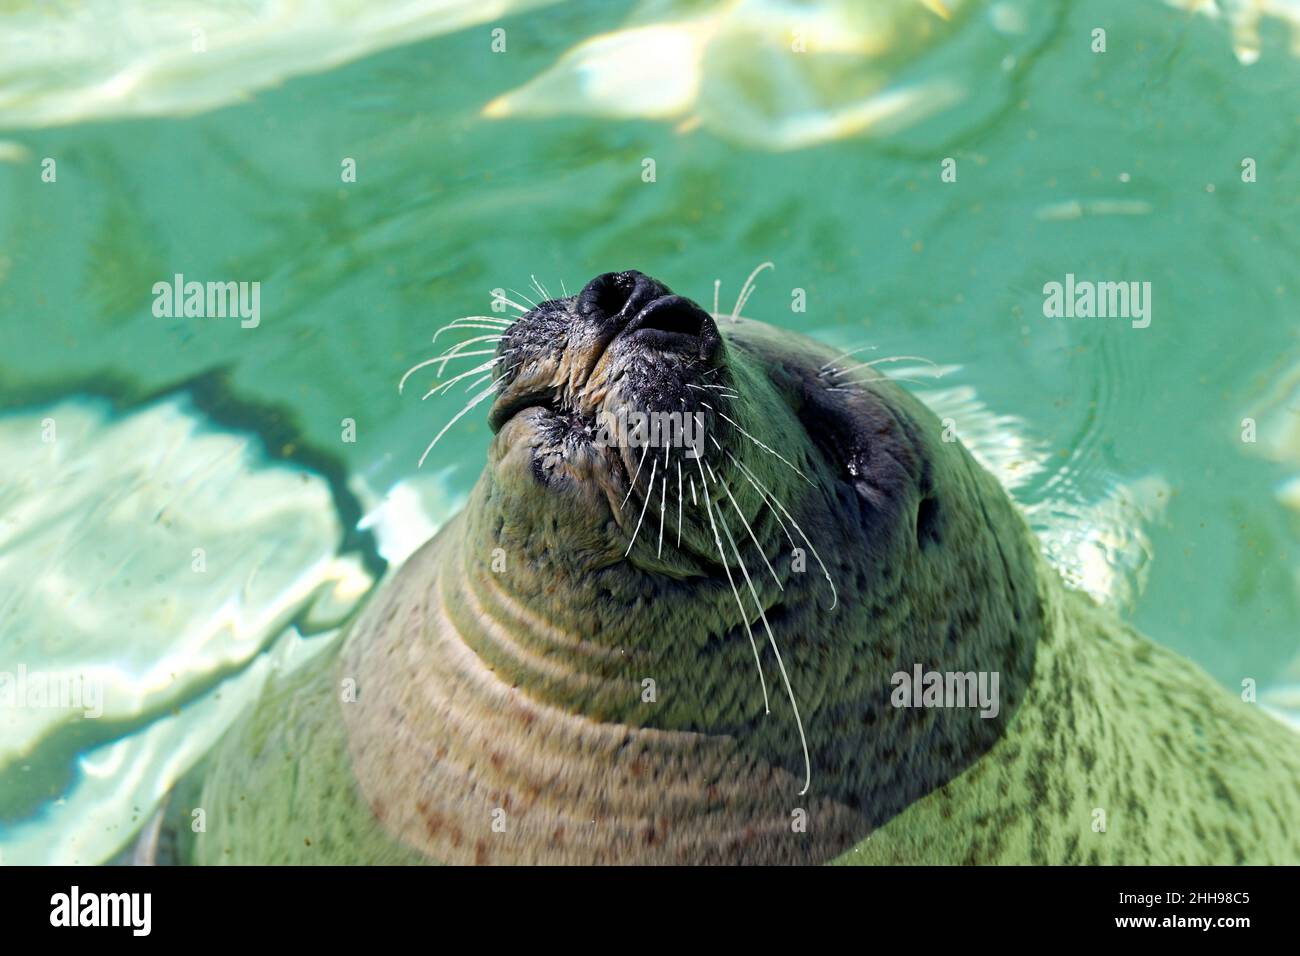 Smiling seal enjoying the sun in the Texel island, Netherlands Closeup, front view. Stock Photo